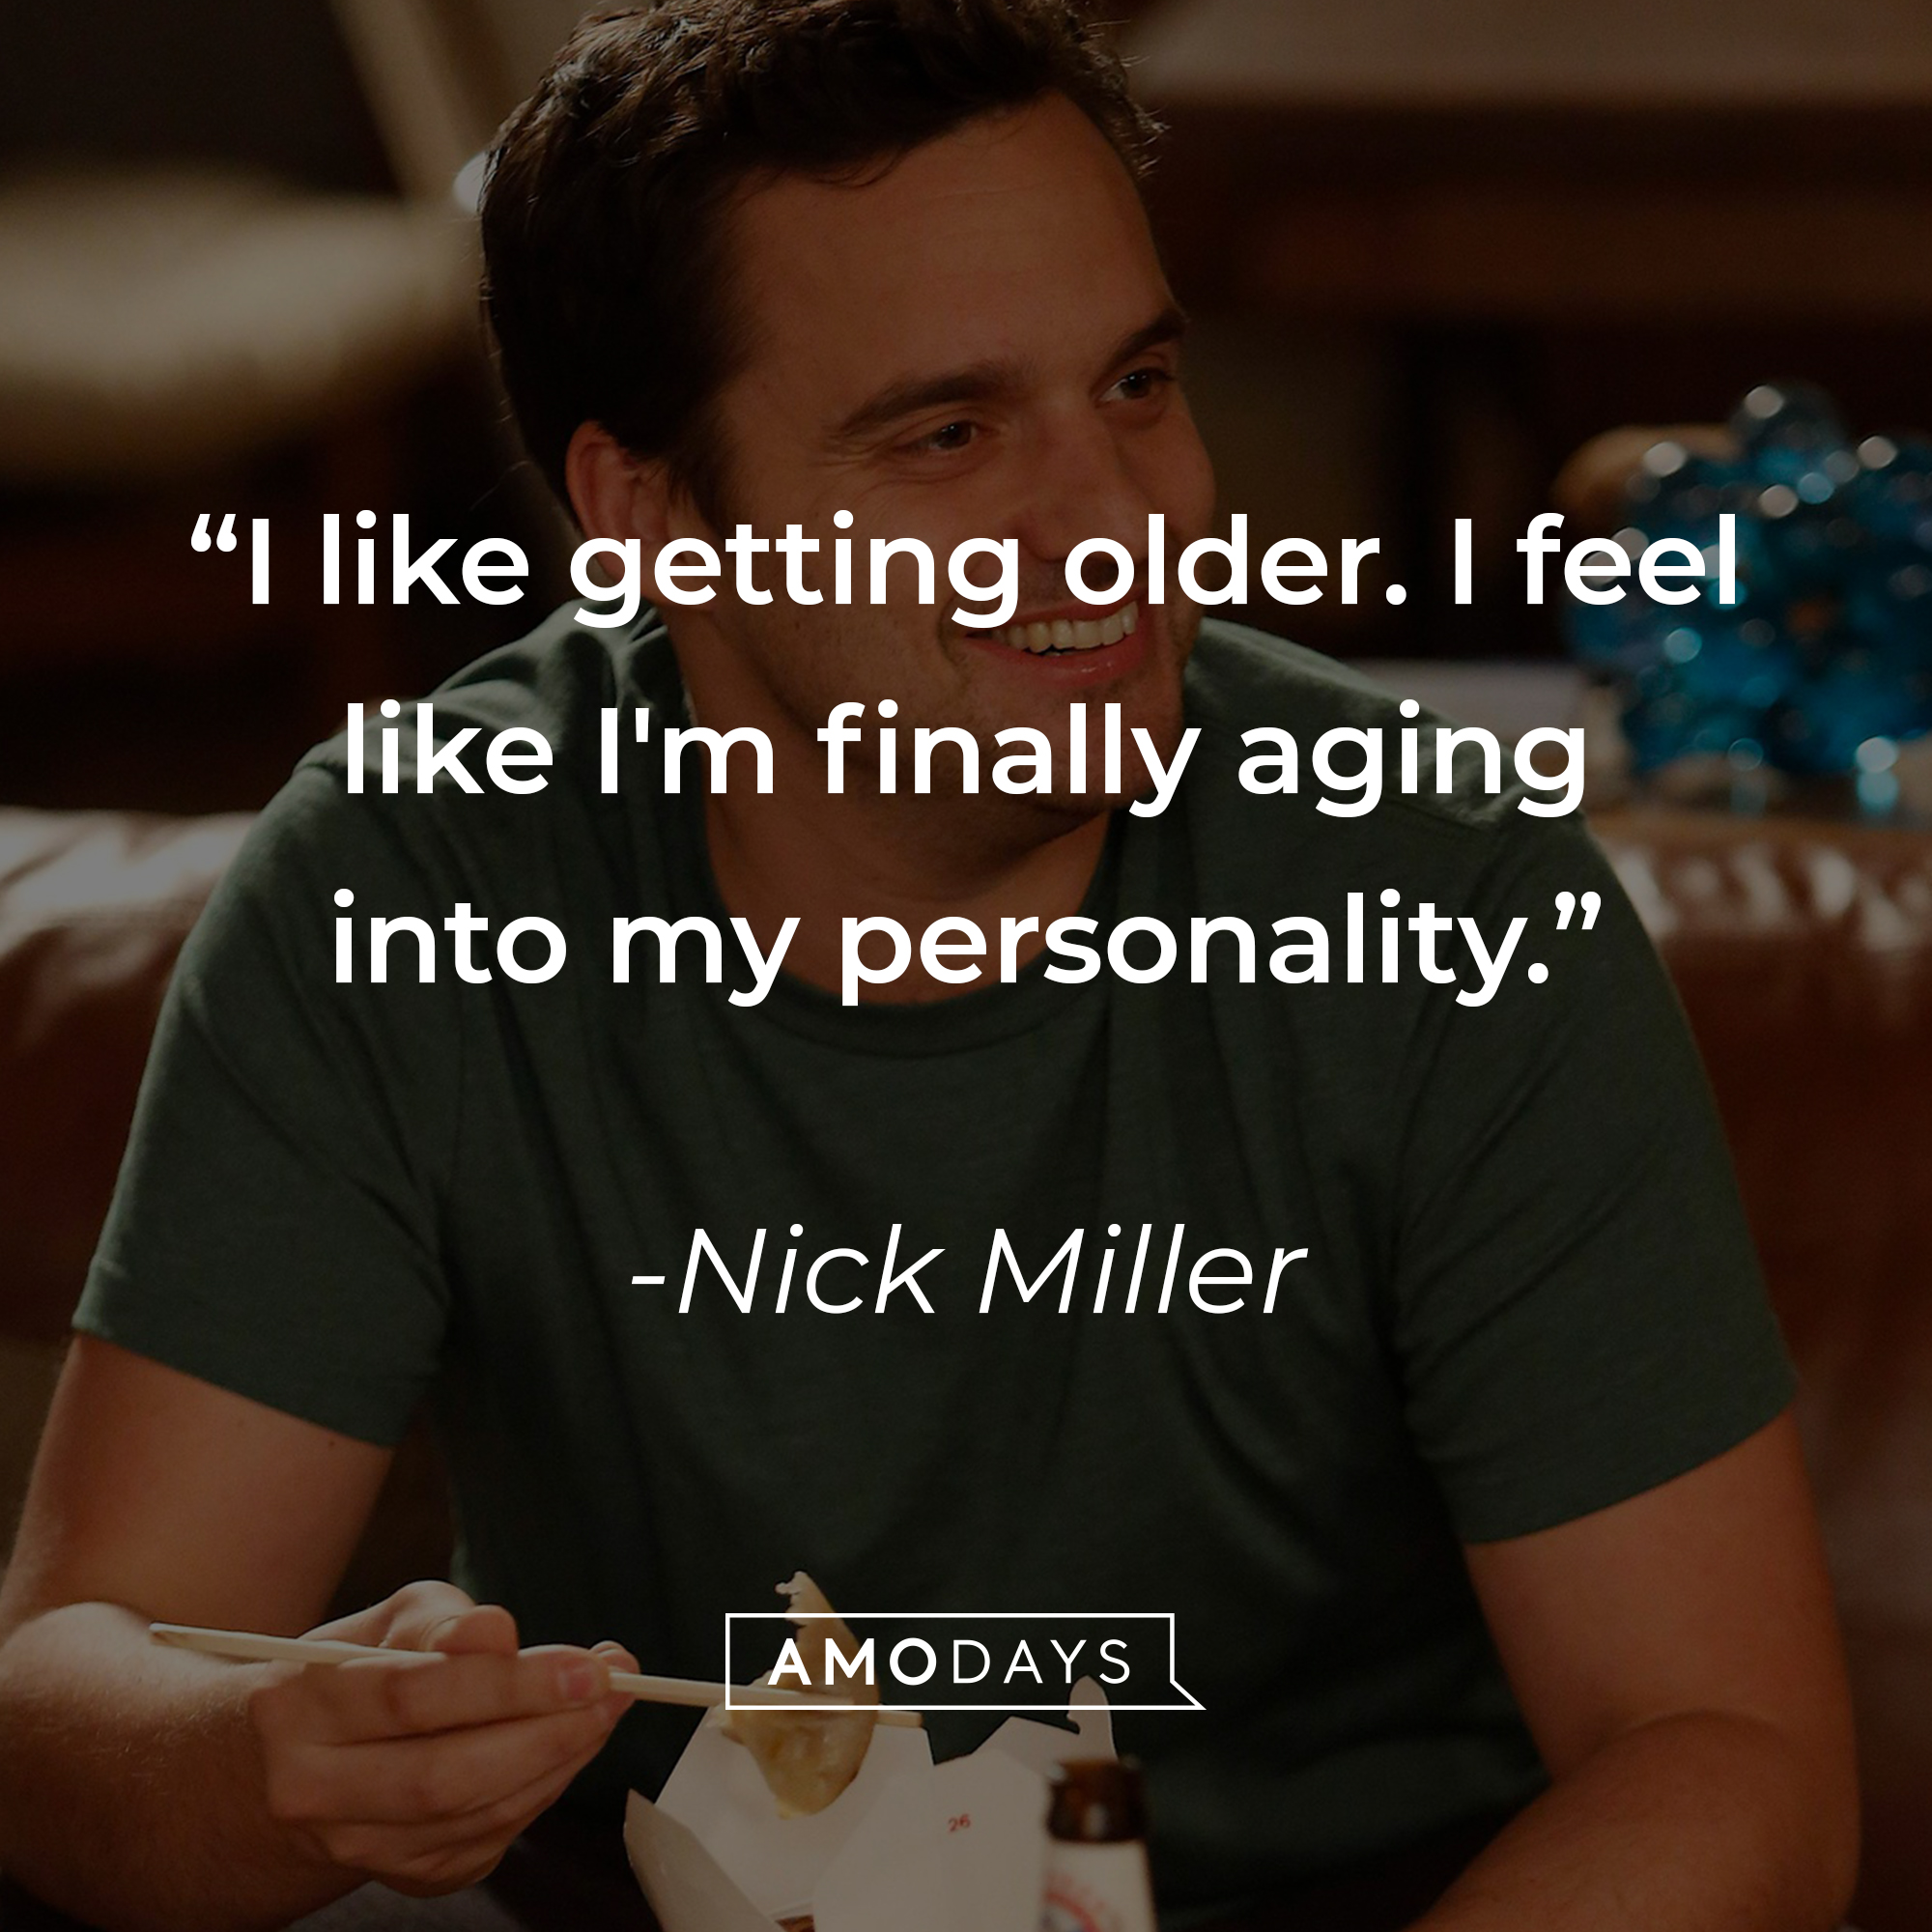 Nick Miller, with his quote: “I like getting older. I feel like I'm finally aging into my personality.” | Source: facebook.com/OfficialNewGirl